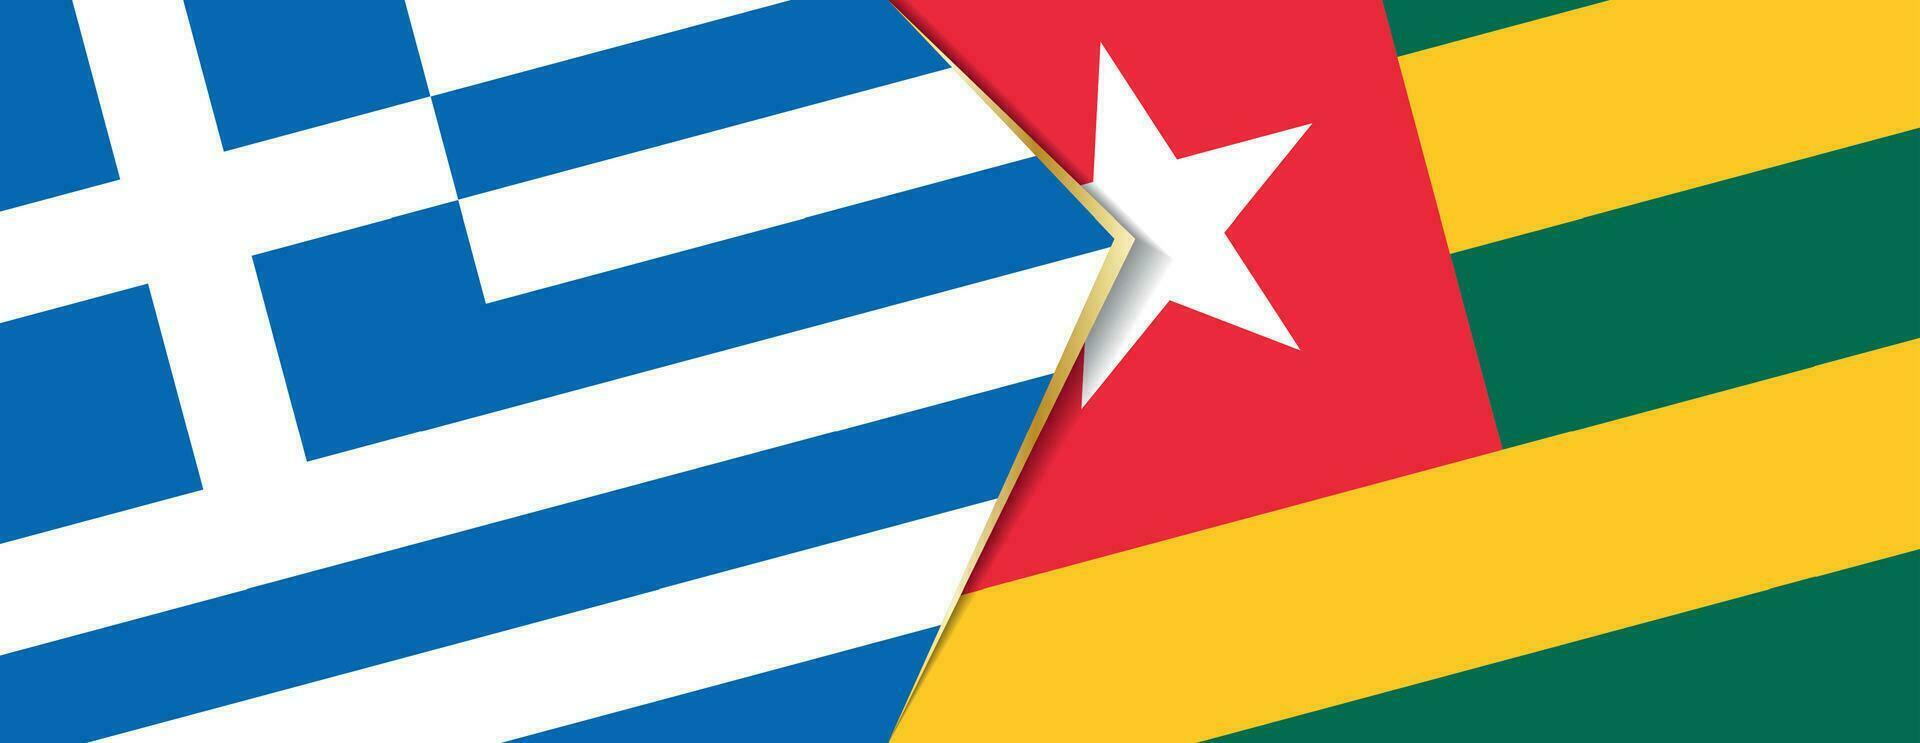 Greece and Togo flags, two vector flags.